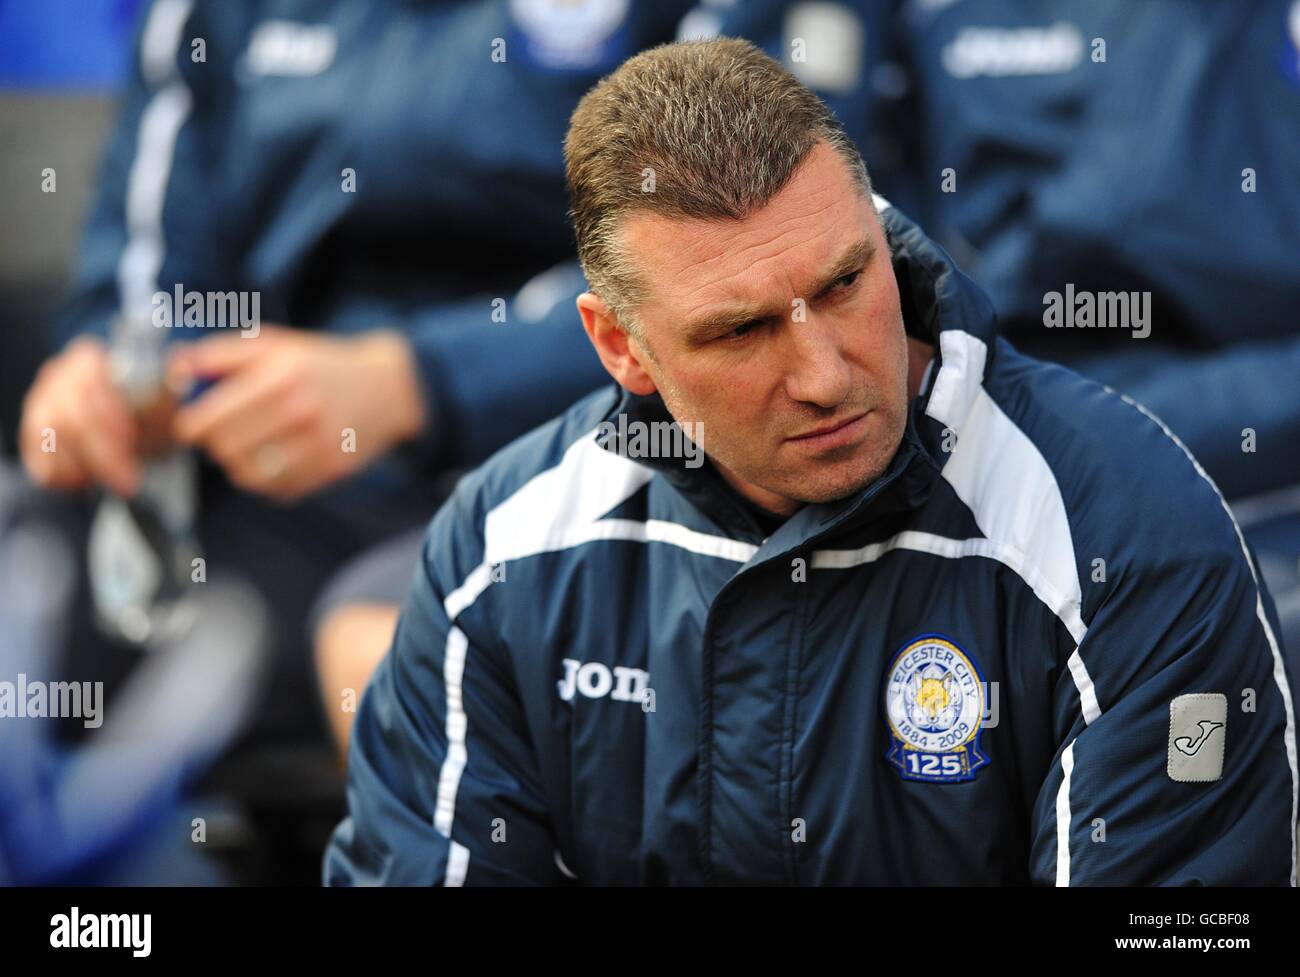 Calcio - Coca-Cola Football League Championship - Leicester City v Nottingham Forest - The Walkers Stadium. Nigel Pearson, responsabile di Leicester City Foto Stock